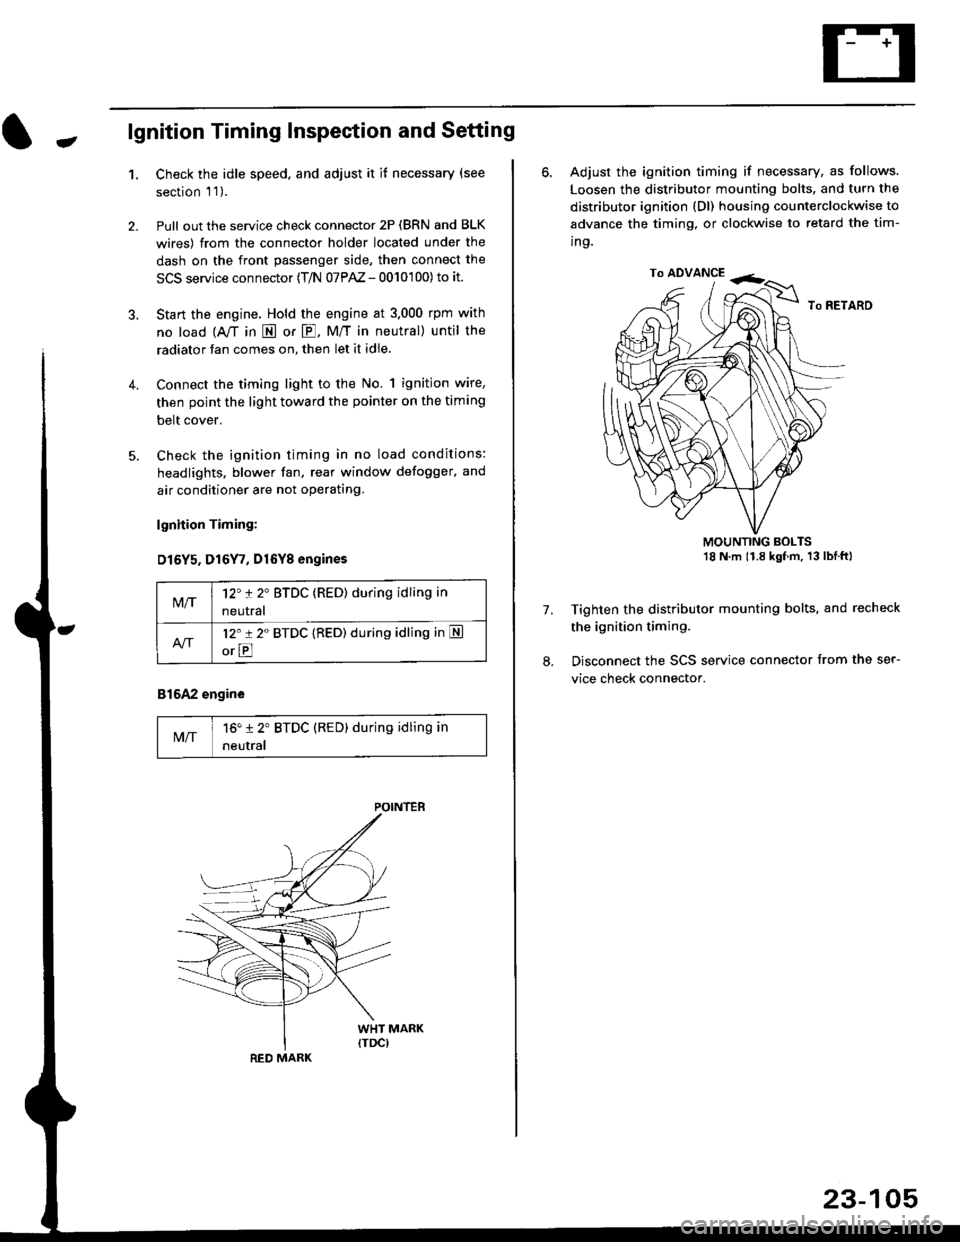 HONDA CIVIC 1998 6.G Workshop Manual -lgnition Timing Inspection and Setting
1.Check the idle speed, and adjust it it necessary (see
section l 1 ).
Pull out the service check connector 2P (BRN and BLK
wires) from the connector holder l